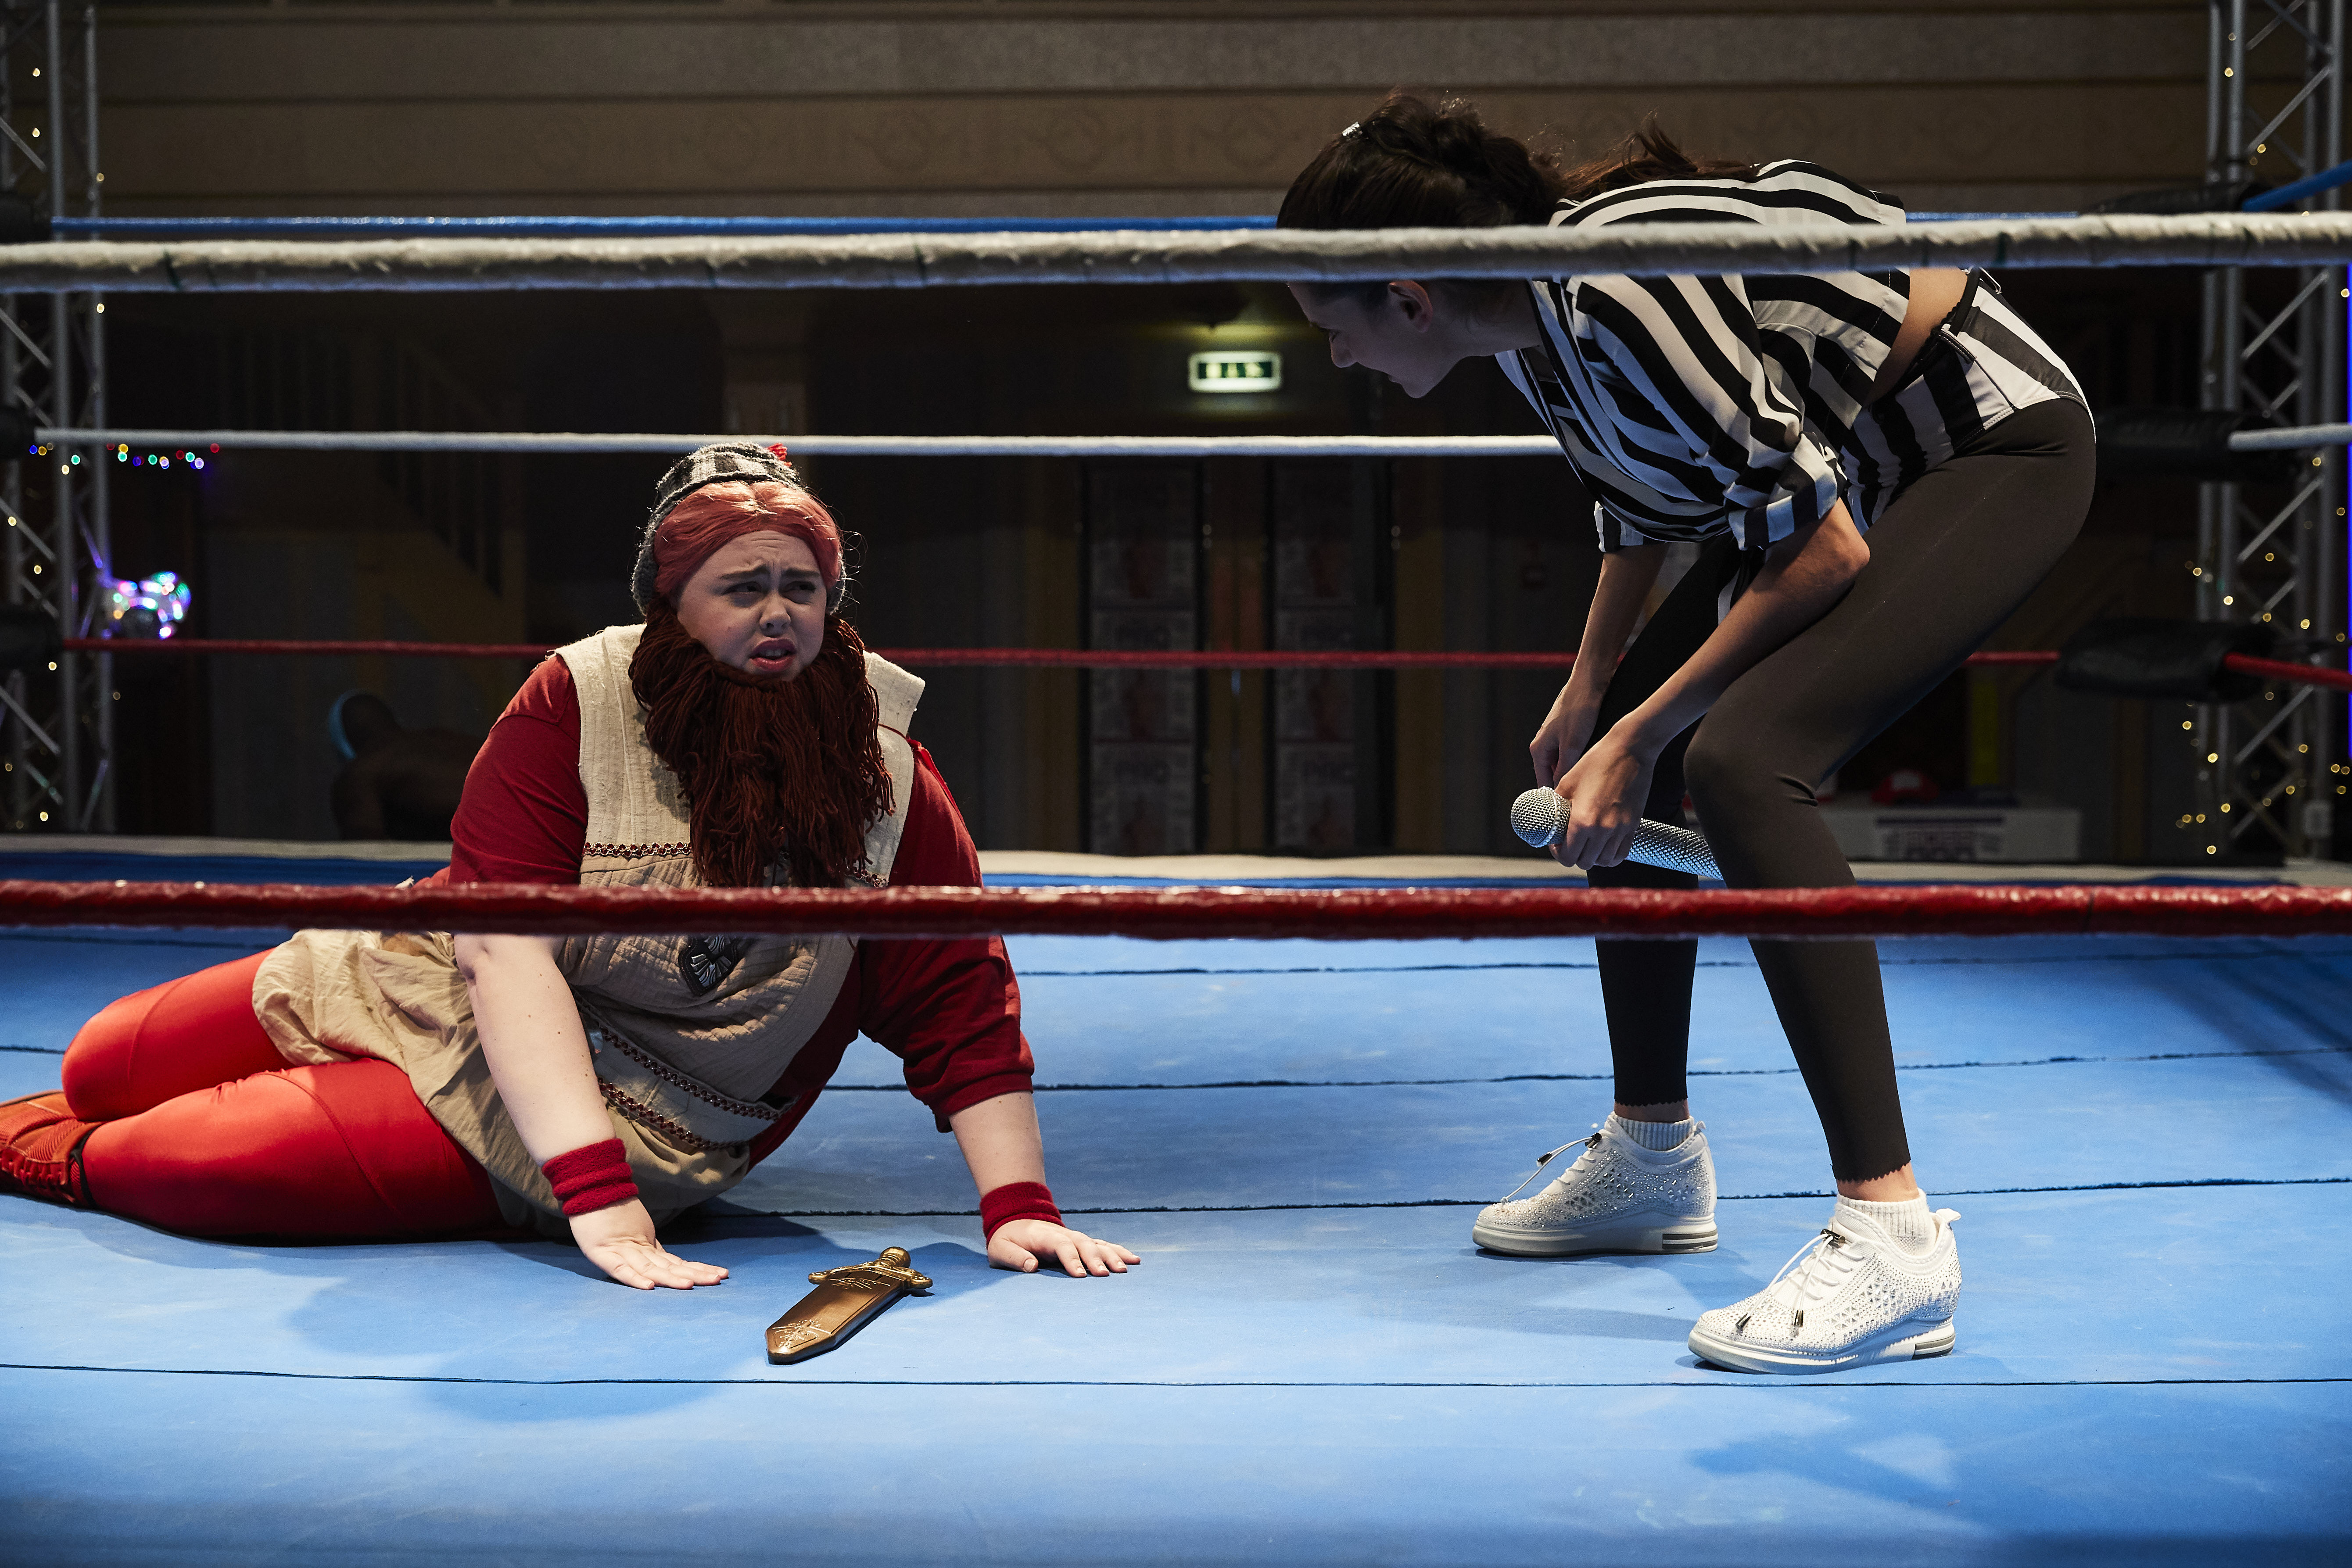 Bertha (Sharon Rooney) is a wrestler with many disguises.